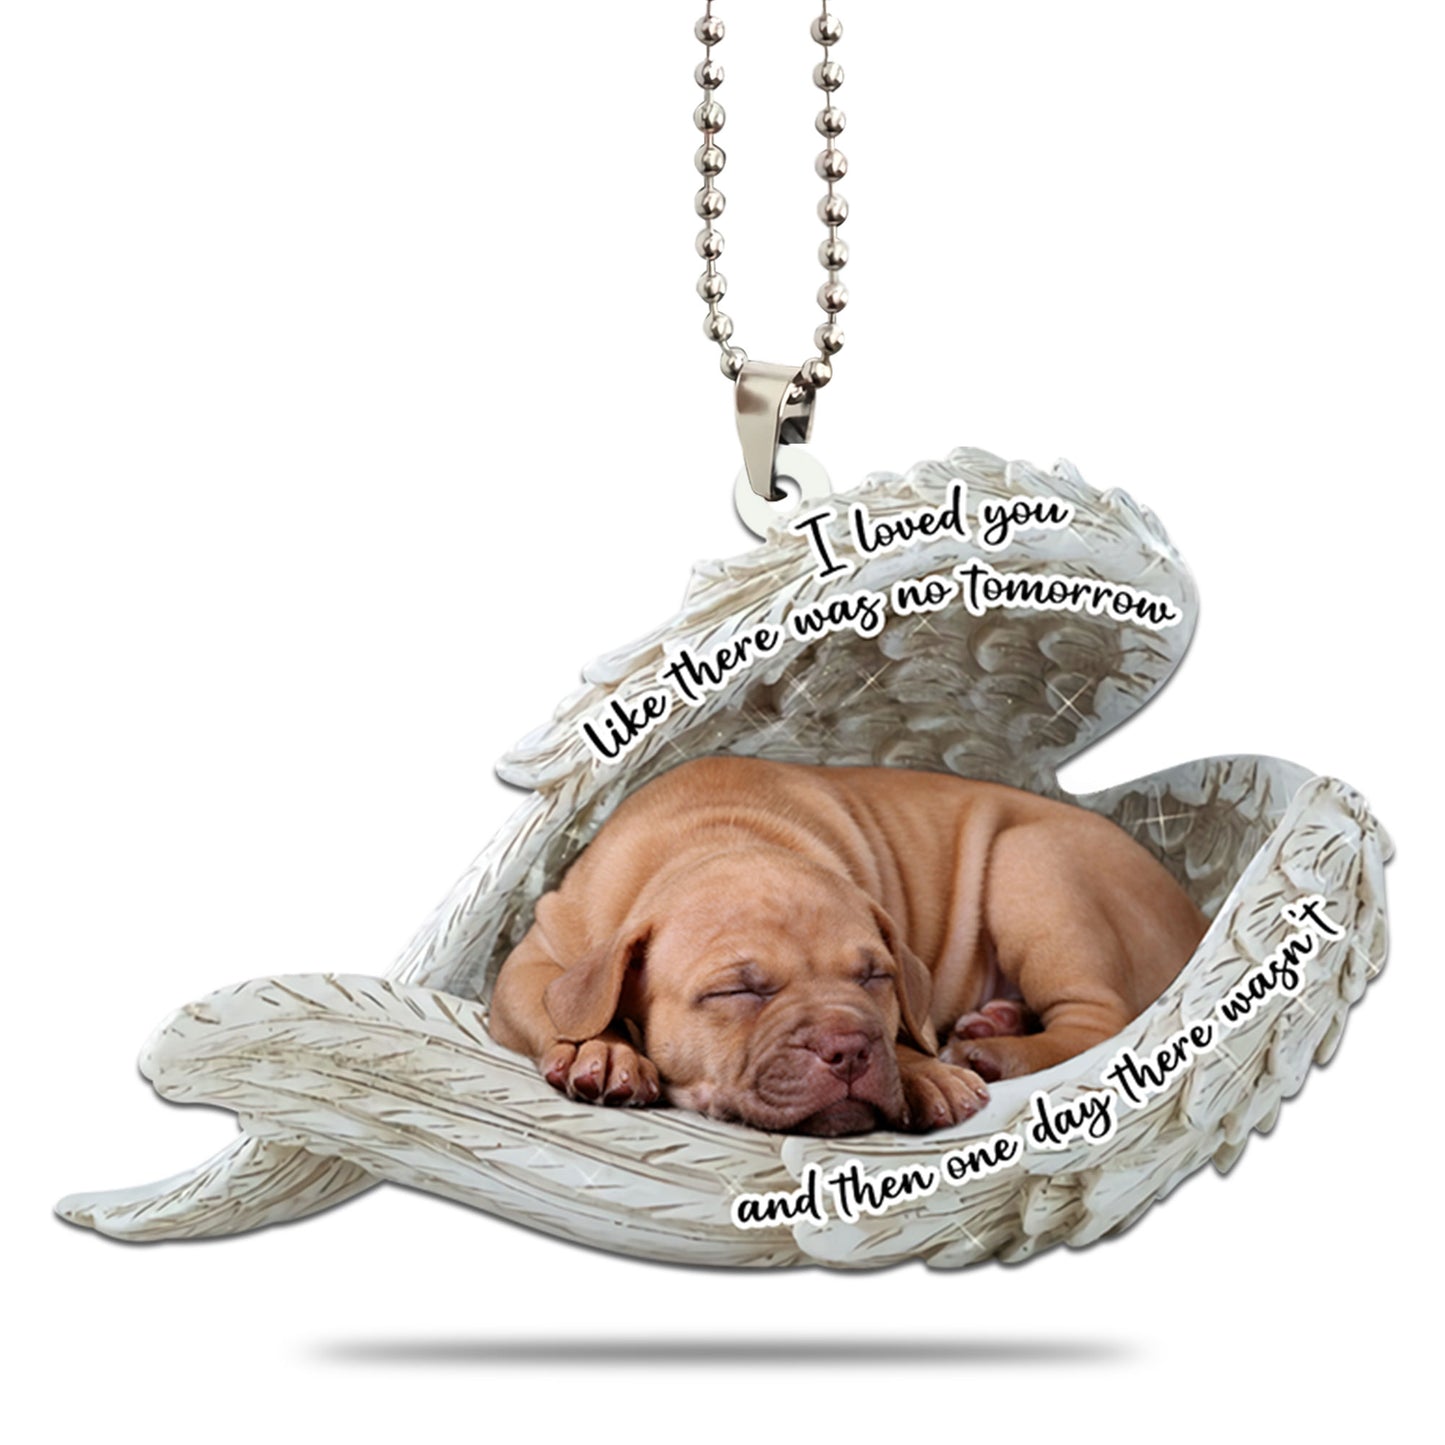 American Pitbull Terrier Sleeping Angel Personalizedwitch Flat Car Ornament